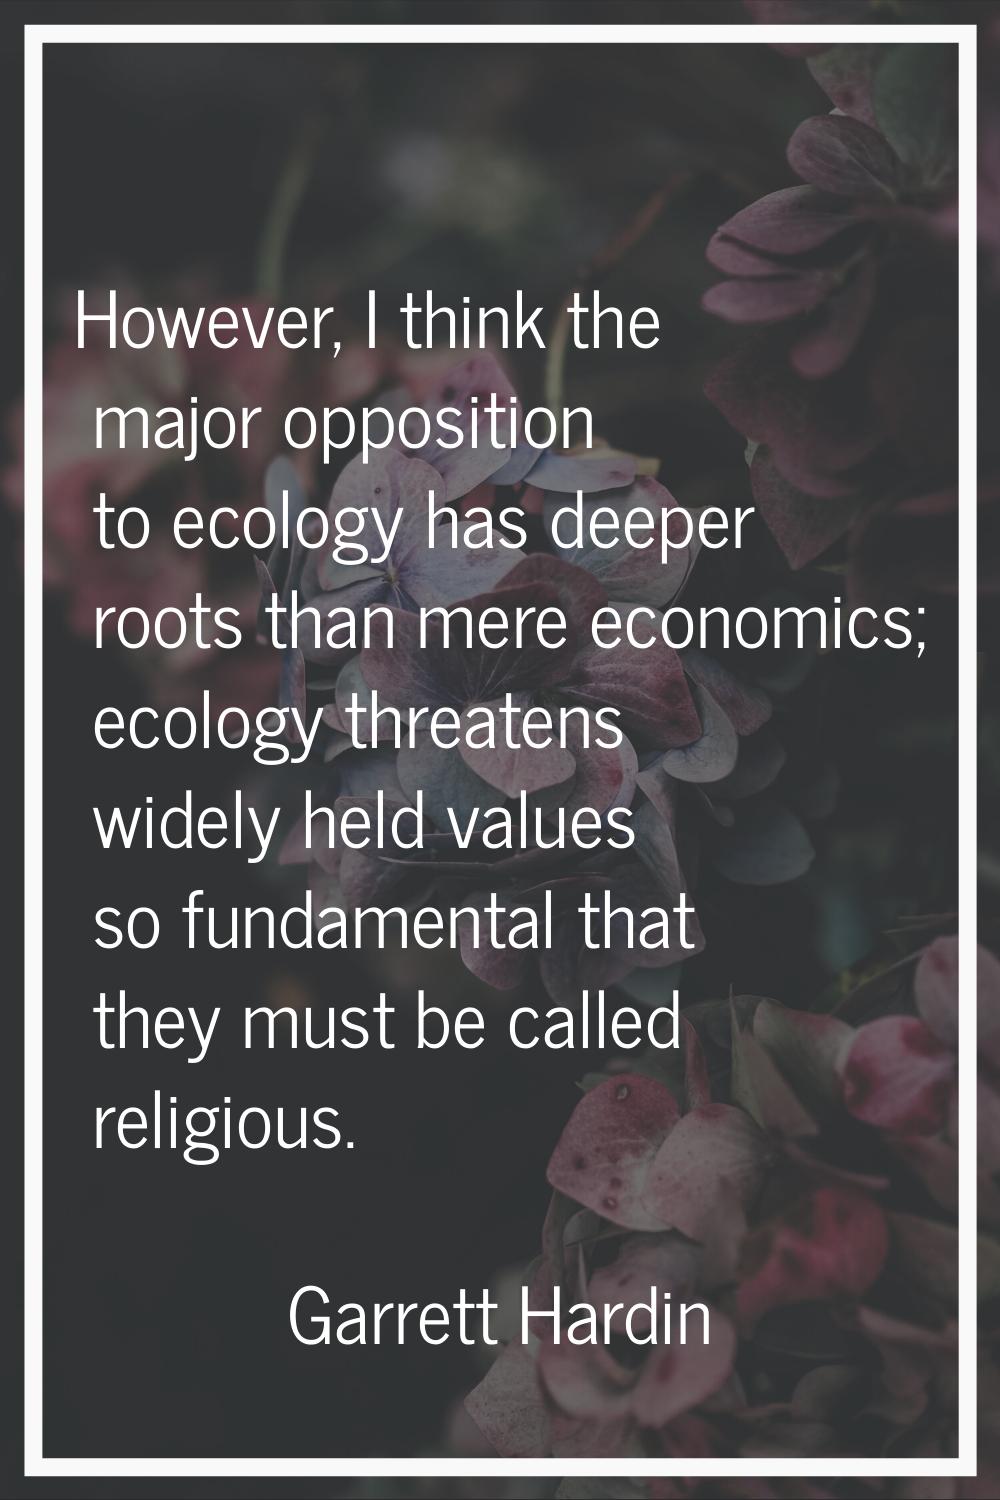 However, I think the major opposition to ecology has deeper roots than mere economics; ecology thre